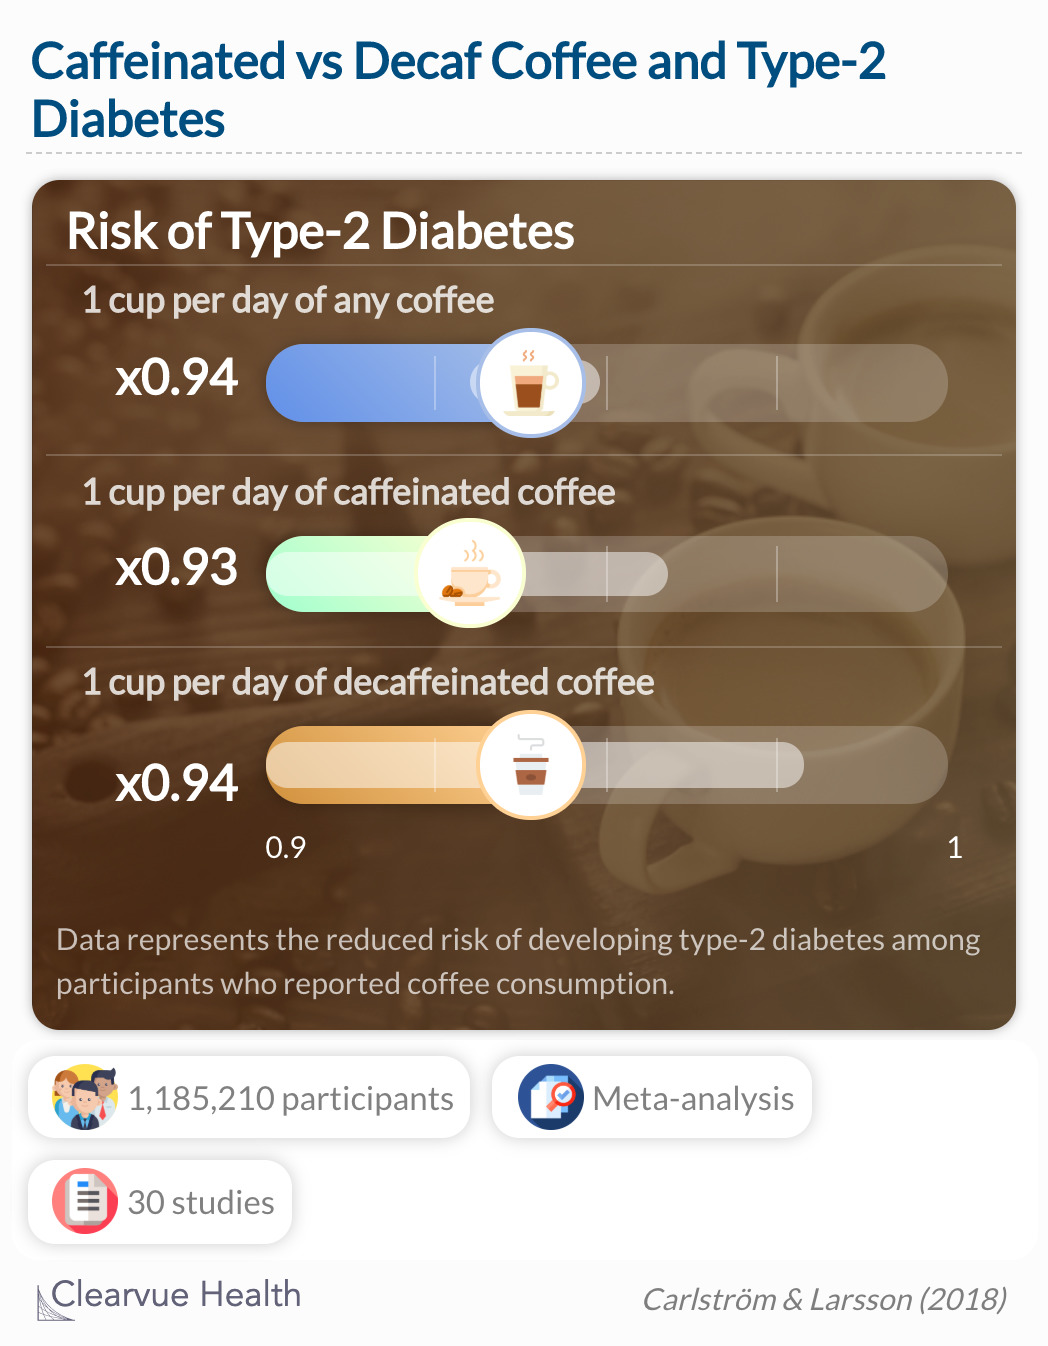  Results were similar for caffeinated coffee consumption and decaffeinated coffee consumption.